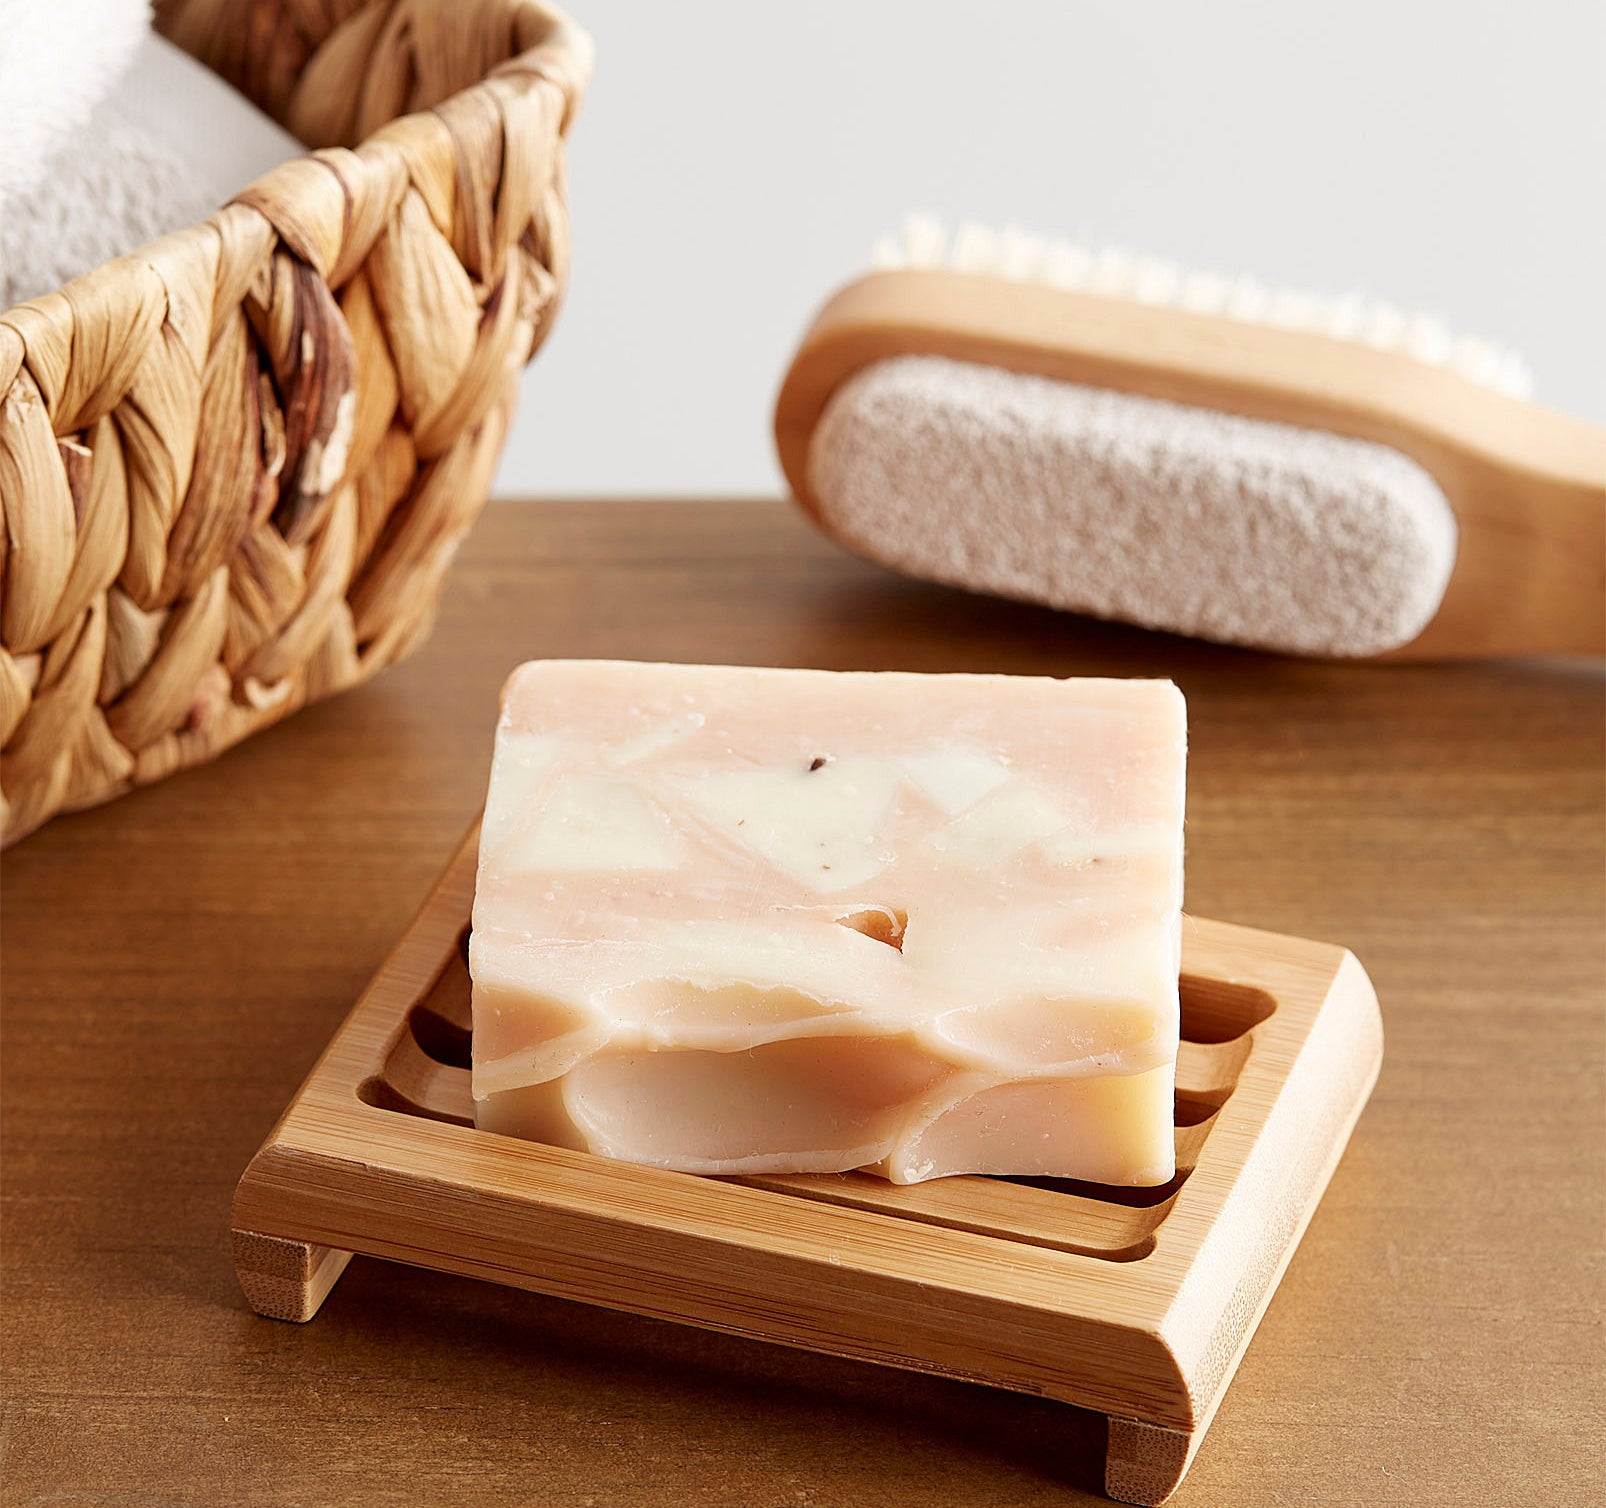 A bar of soap on the bamboo dish